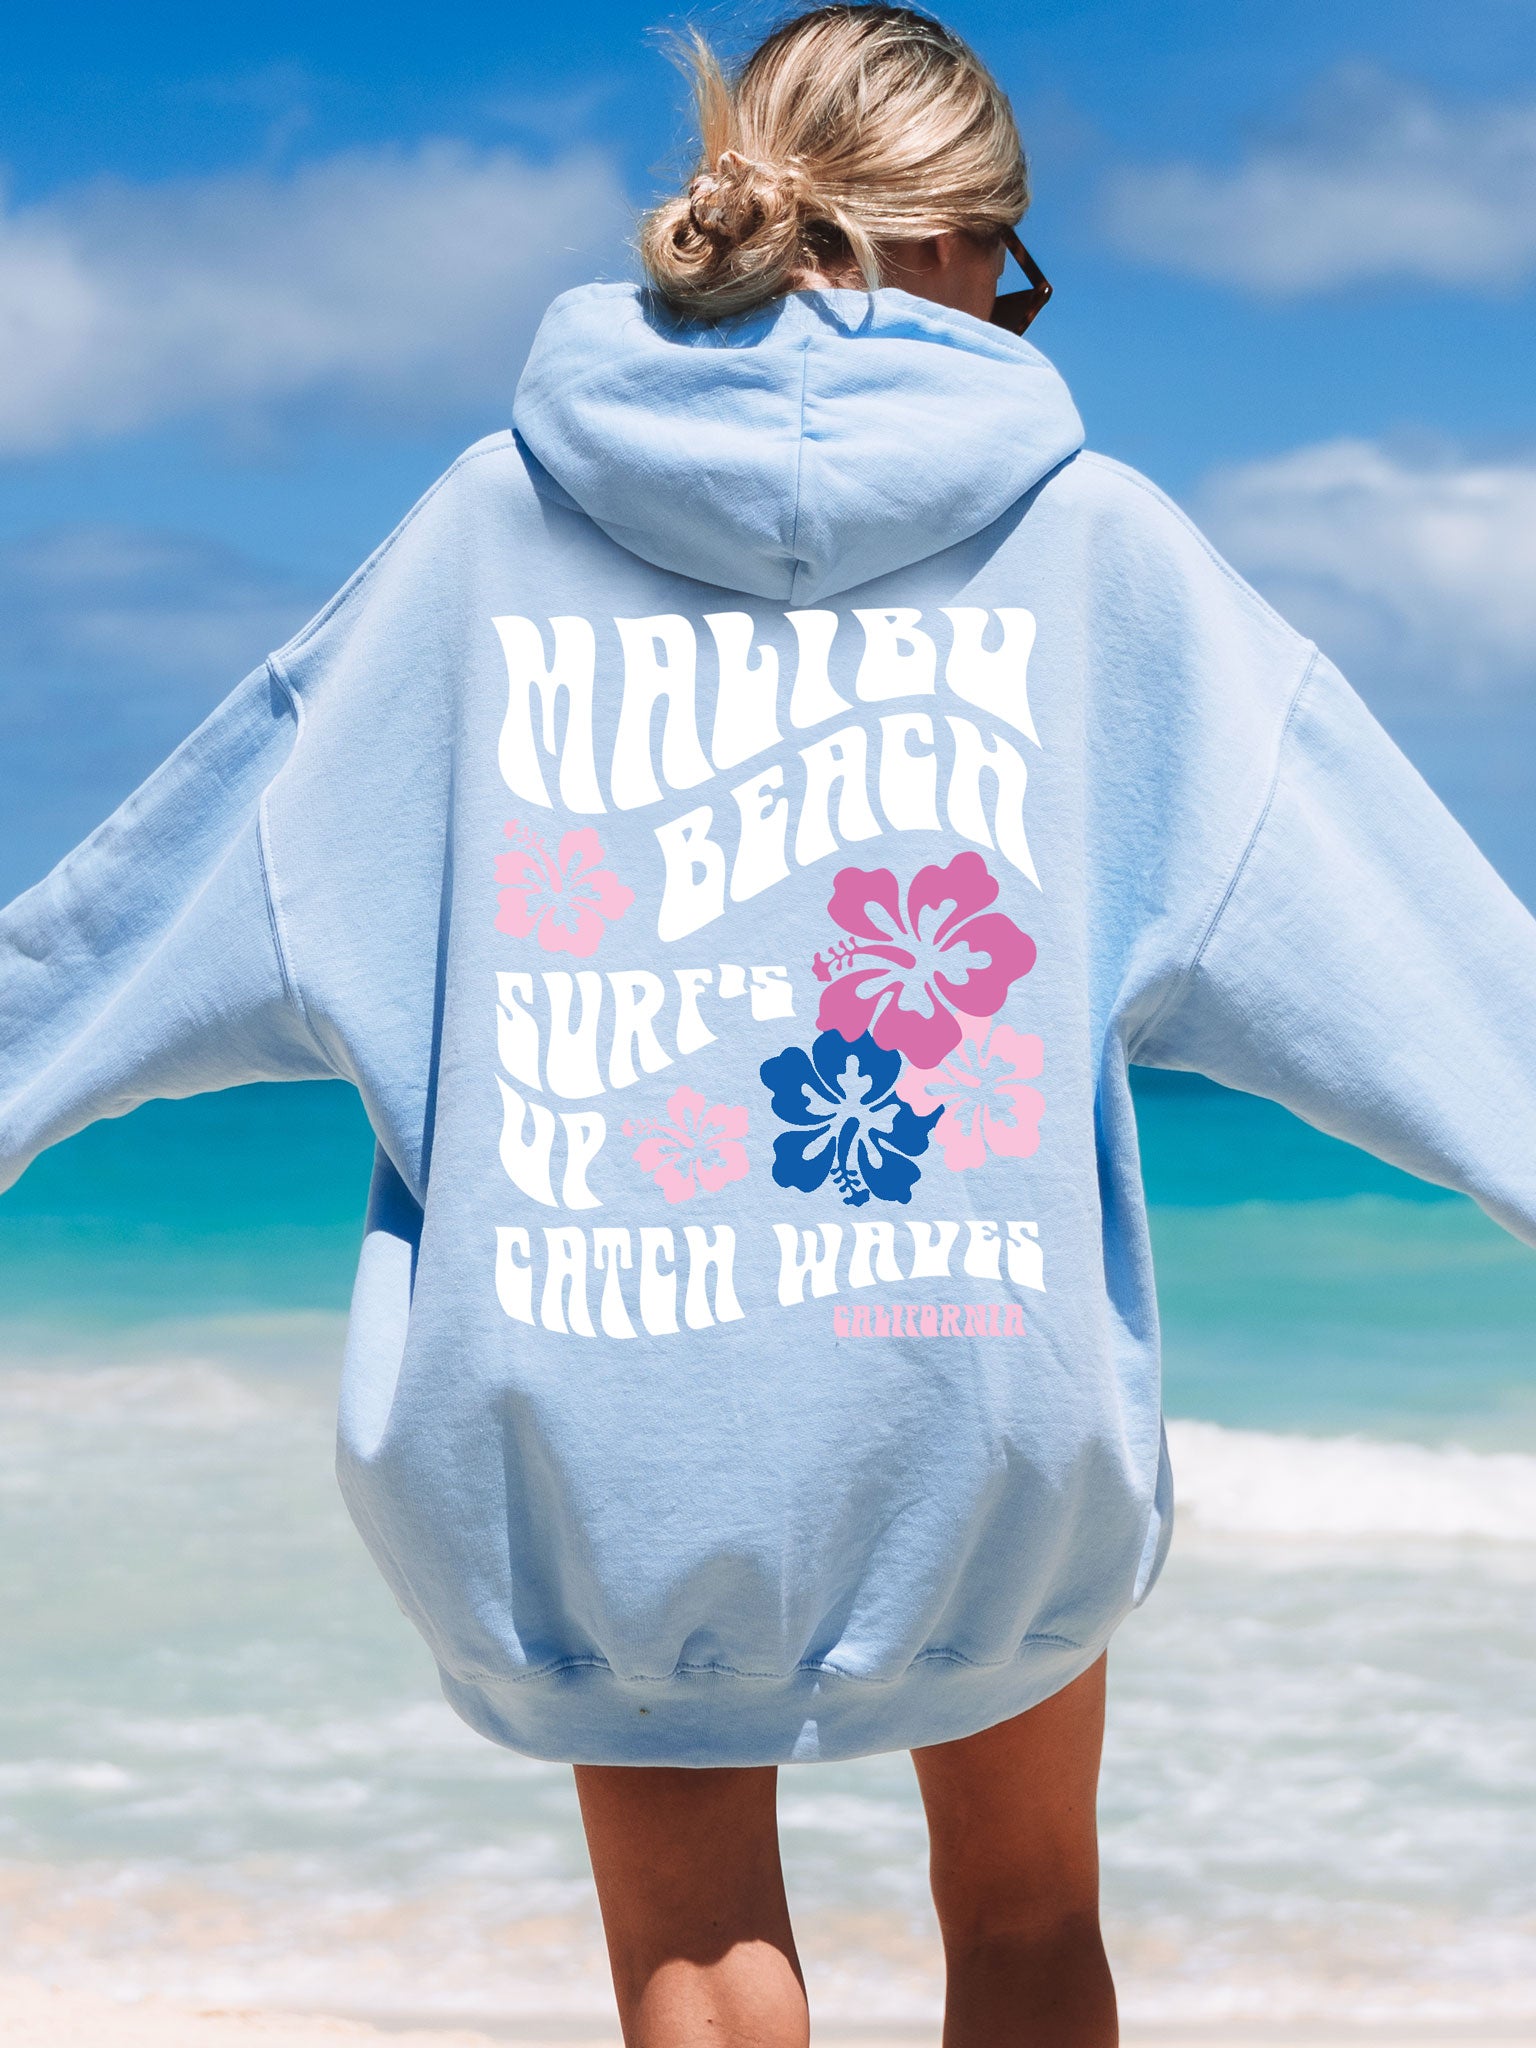 Coconut Girl Hibiscus Surf Hoodie Light Blue with White and Colorful Ink Malibu Beach California